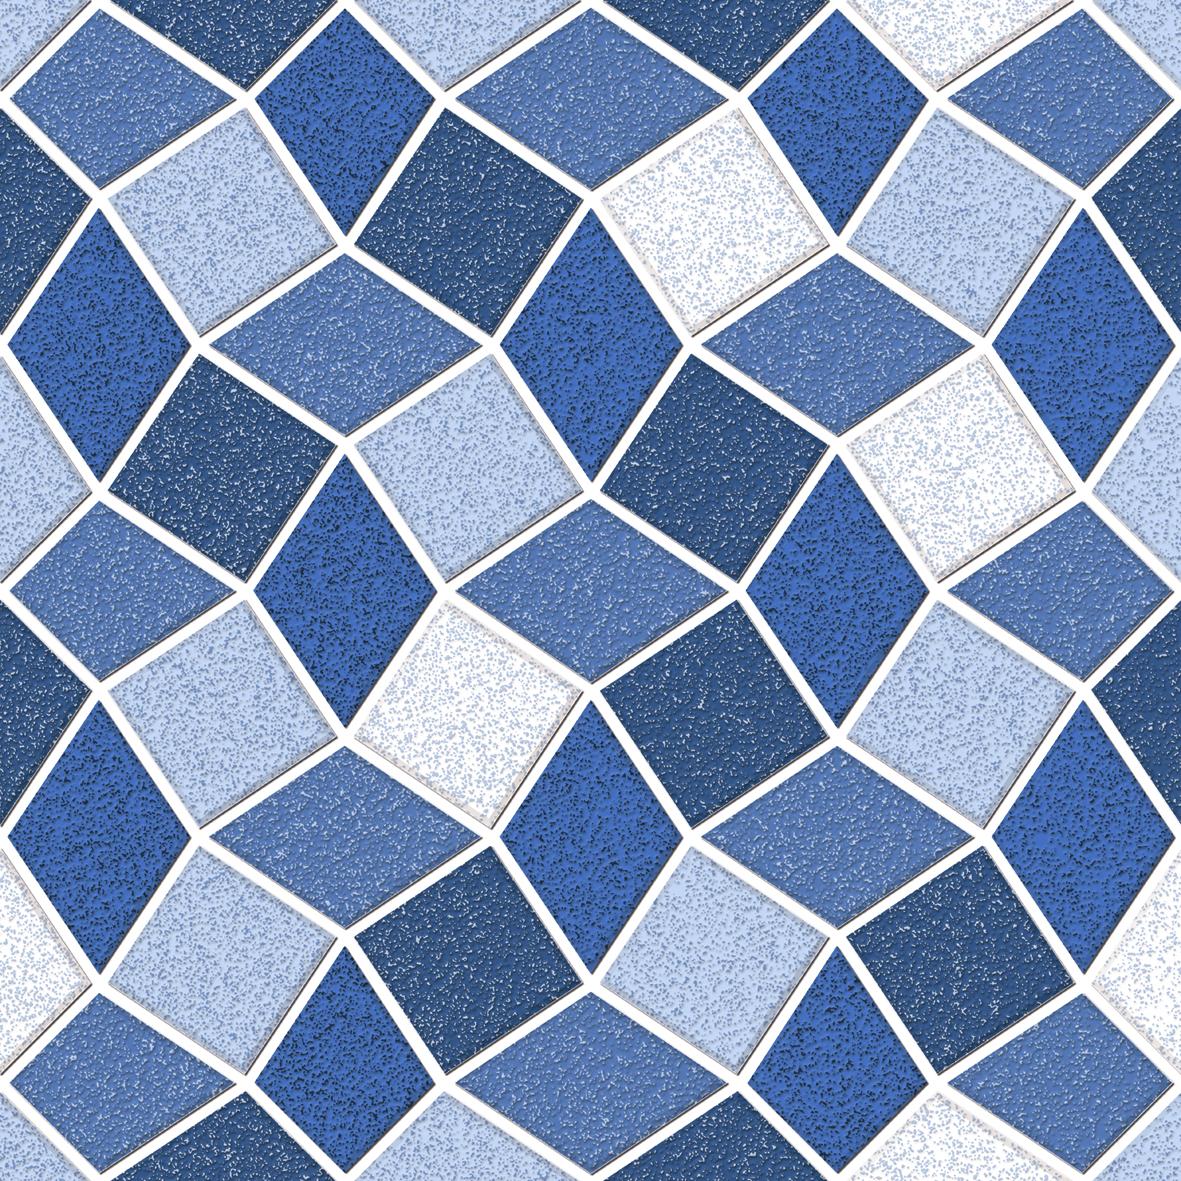 Blue Tiles for Balcony Tiles, Swimming Pool Tiles, Parking Tiles, Pathway Tiles, Commercial/Office, Outdoor Area